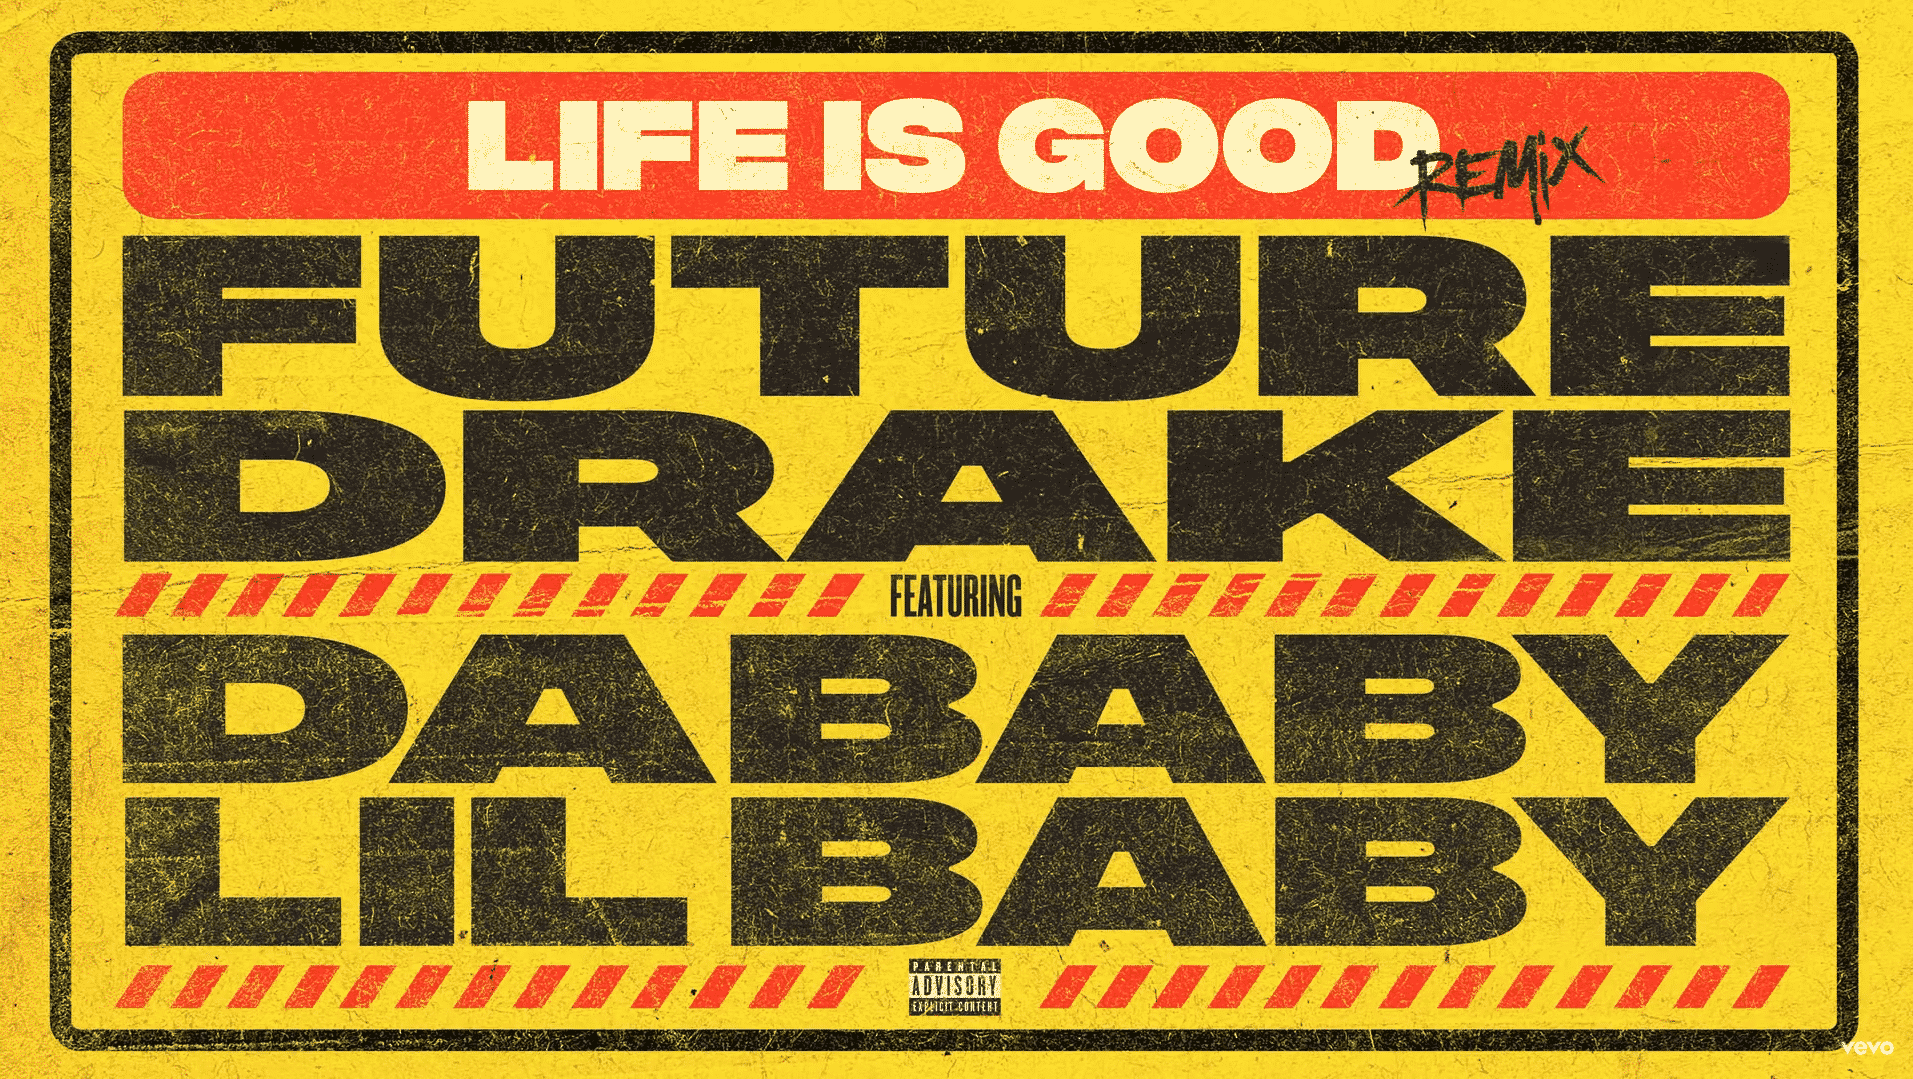 Good feat. Future Life is good. Life is good Future feat. Drake. Life is good Drake. Future - Life is good ft. Drake.